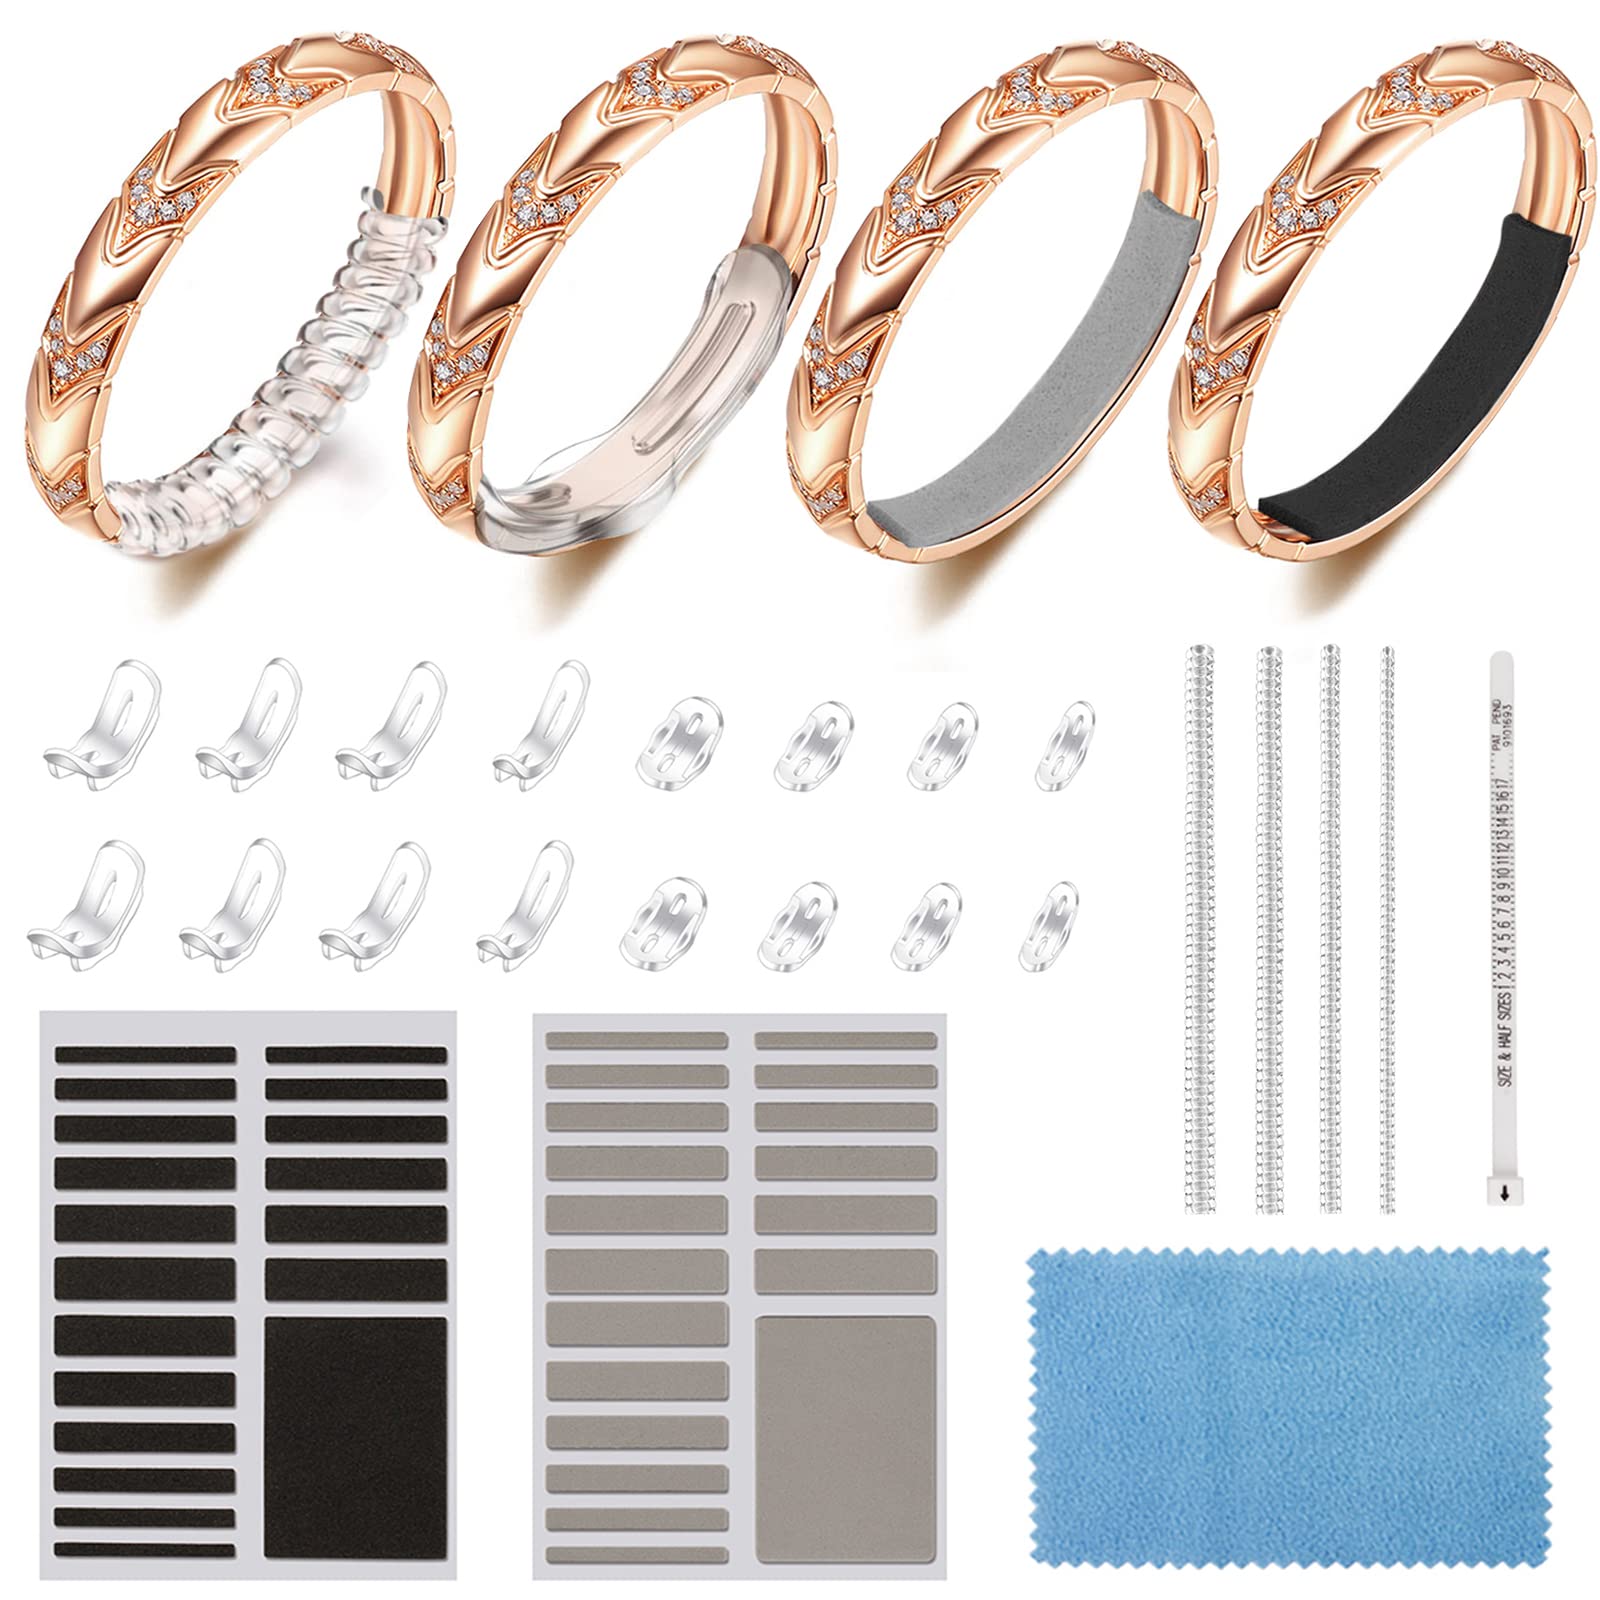 Ring Size Adjuster for Loose Rings, Multiple Size, Ring Sizer